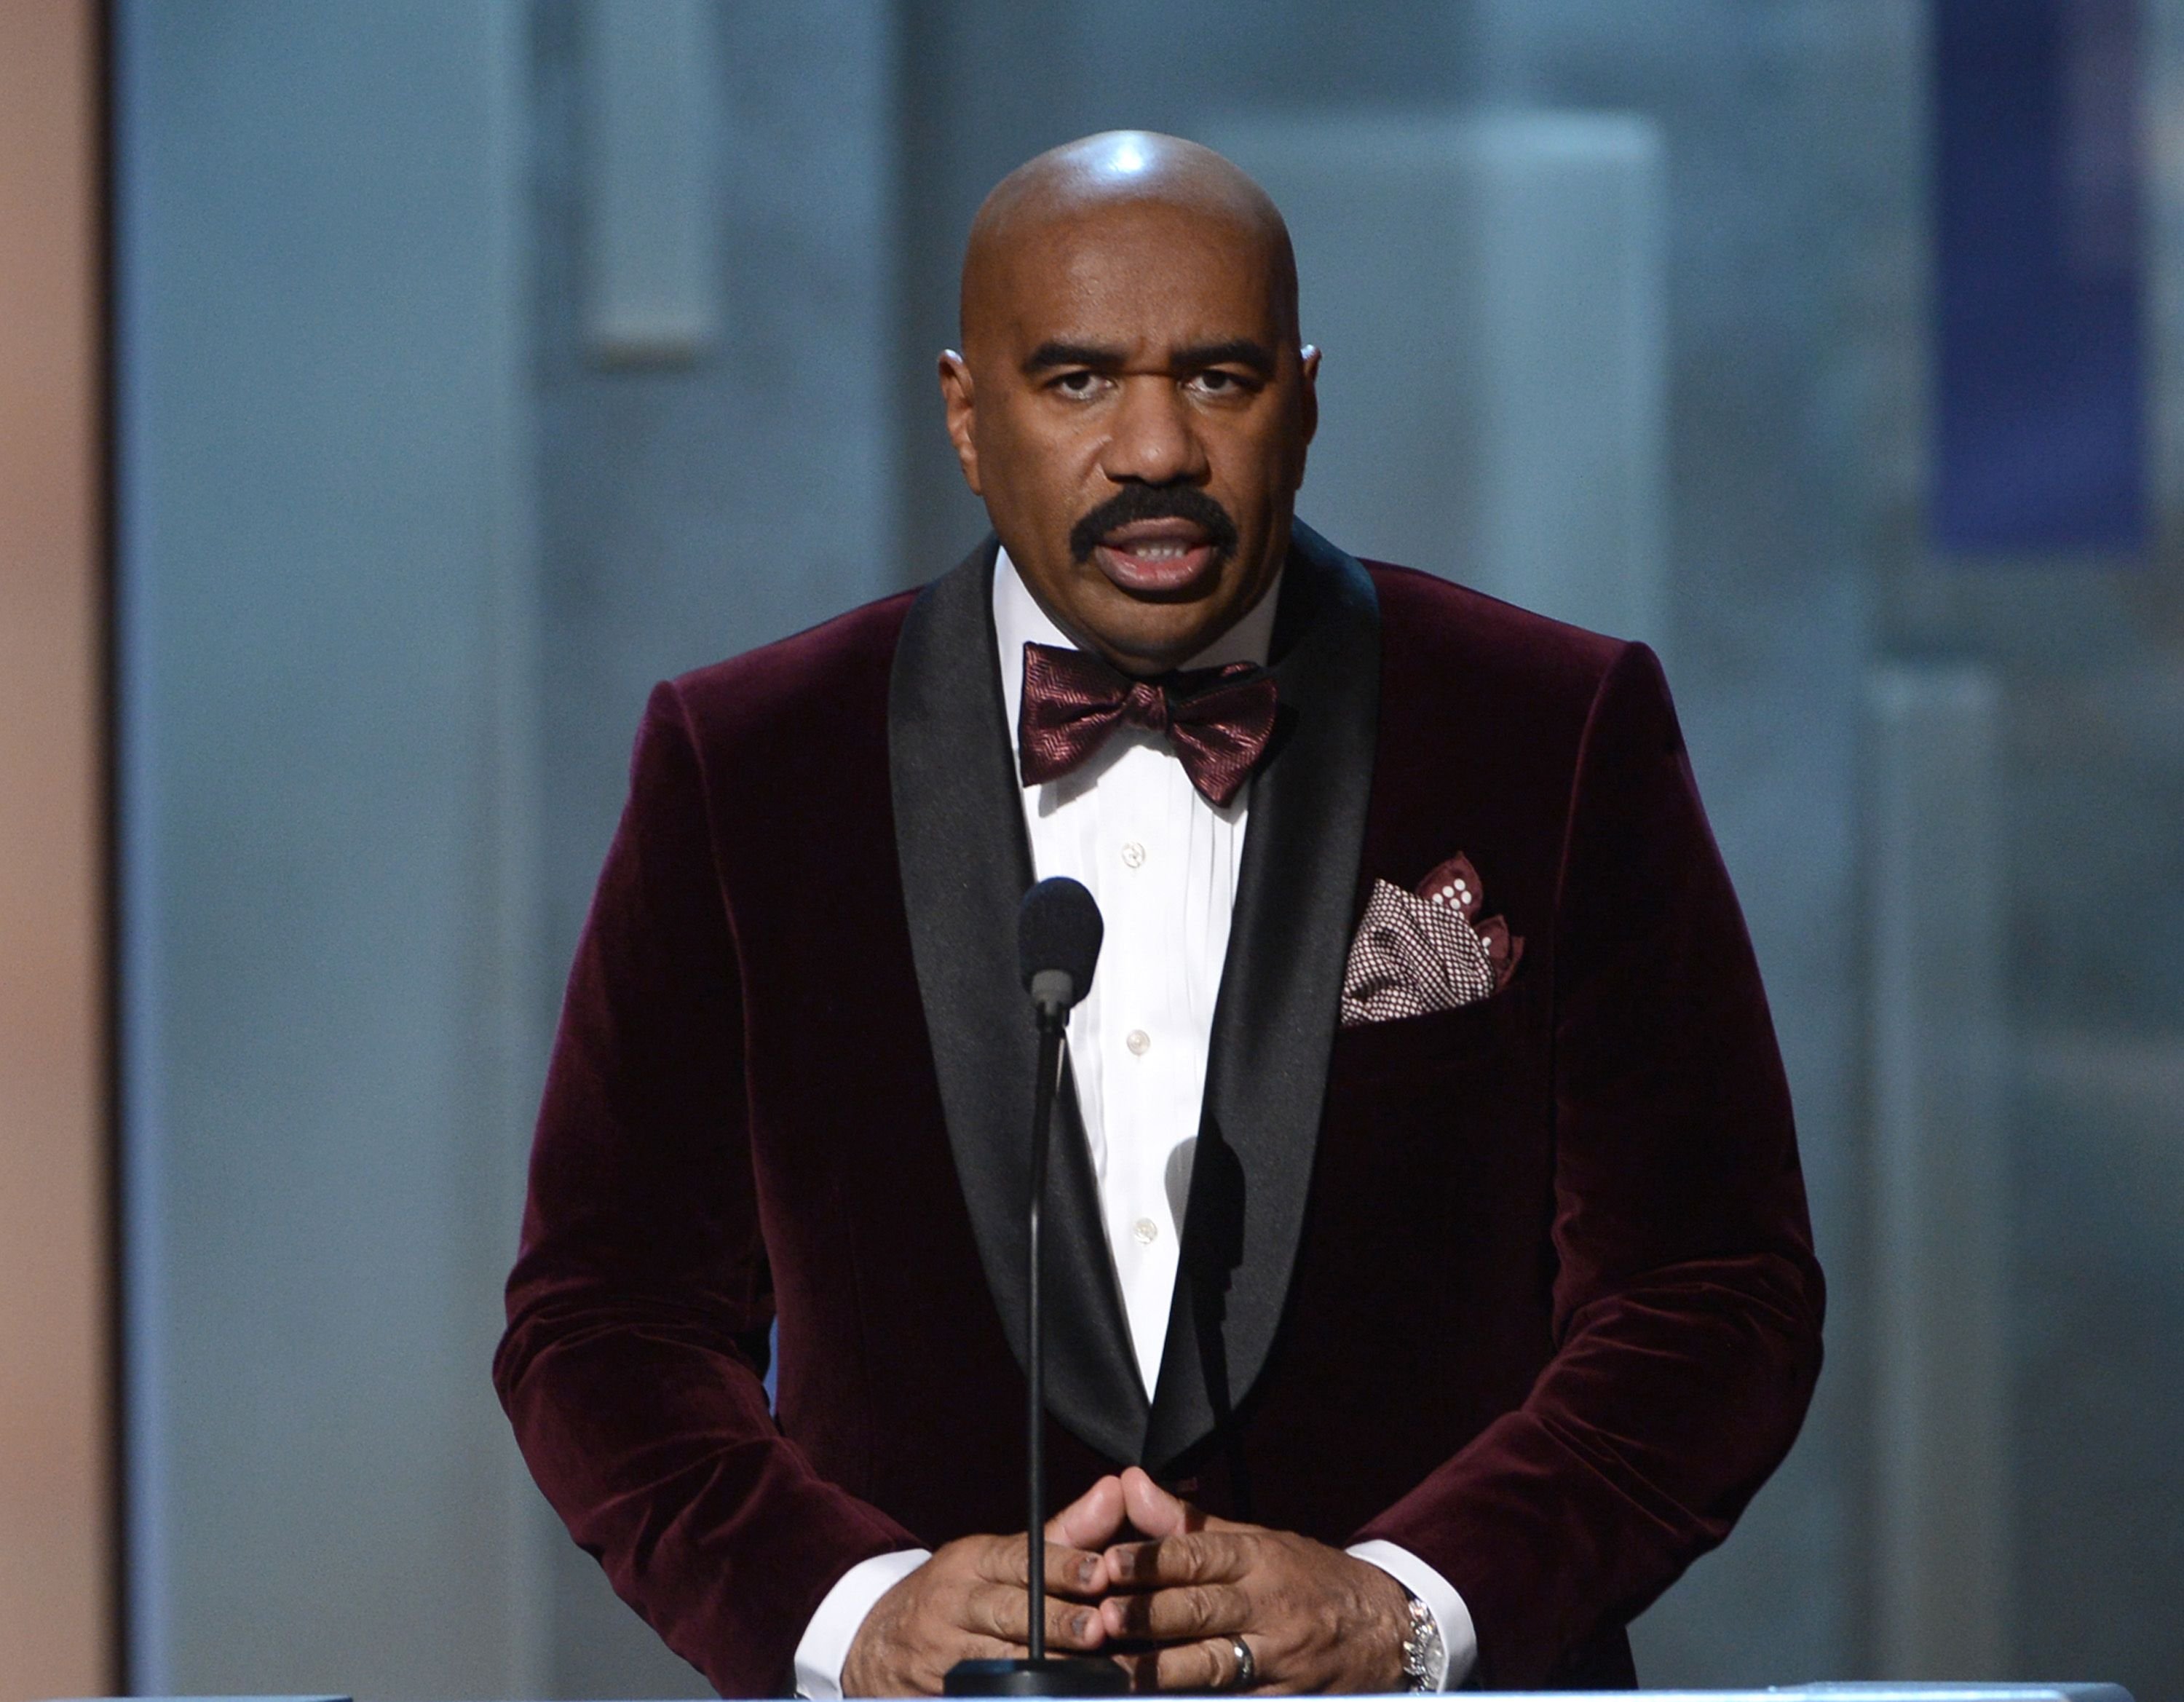 Steve Harvey speaking on stage during the 44th NAACP Image Awards at The Shrine Auditorium in Los Angeles, California | Photo: Kevin Winter/Getty Images for NAACP Image Awards